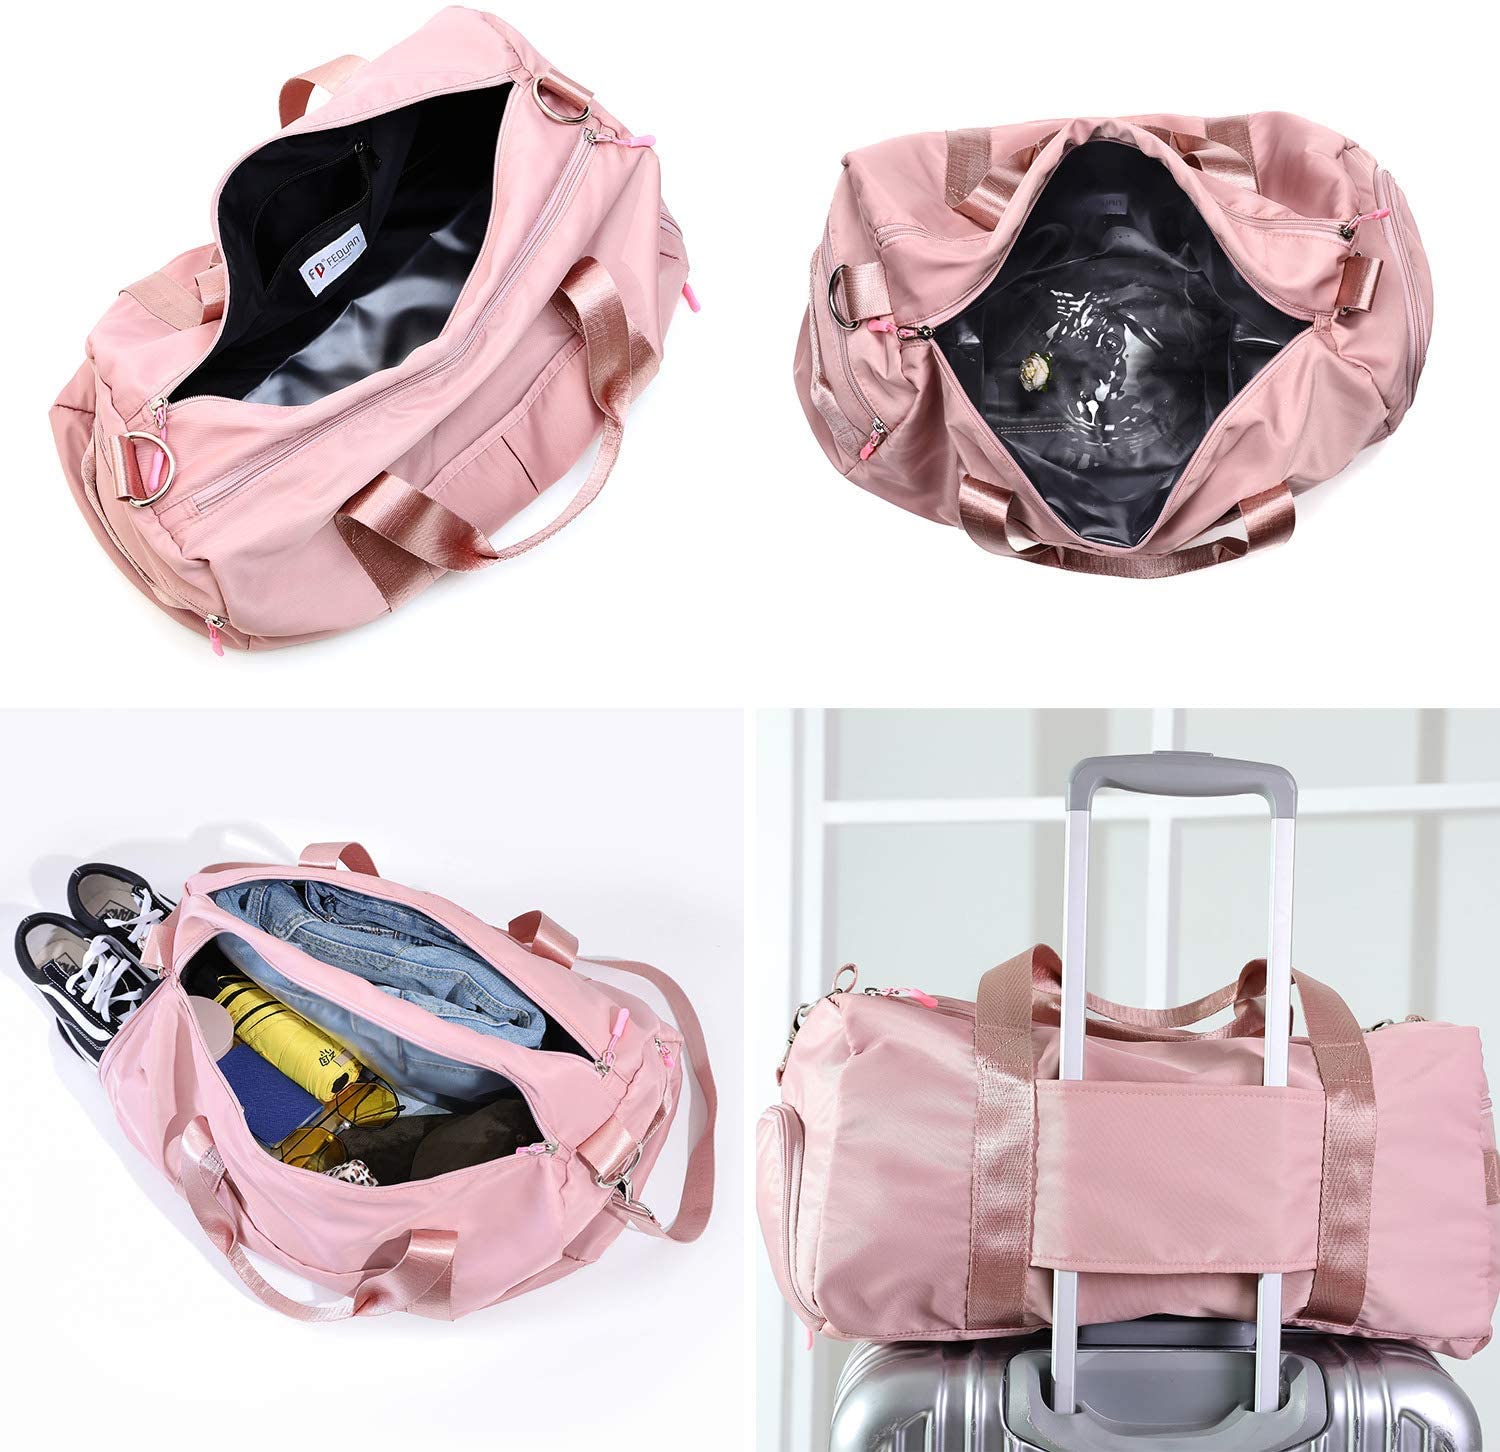 Low Moq Gym bag Custom High Quality Waterproof Durable Polyester Sports Travel Bag With Shoe Compartment women Duffle Bag